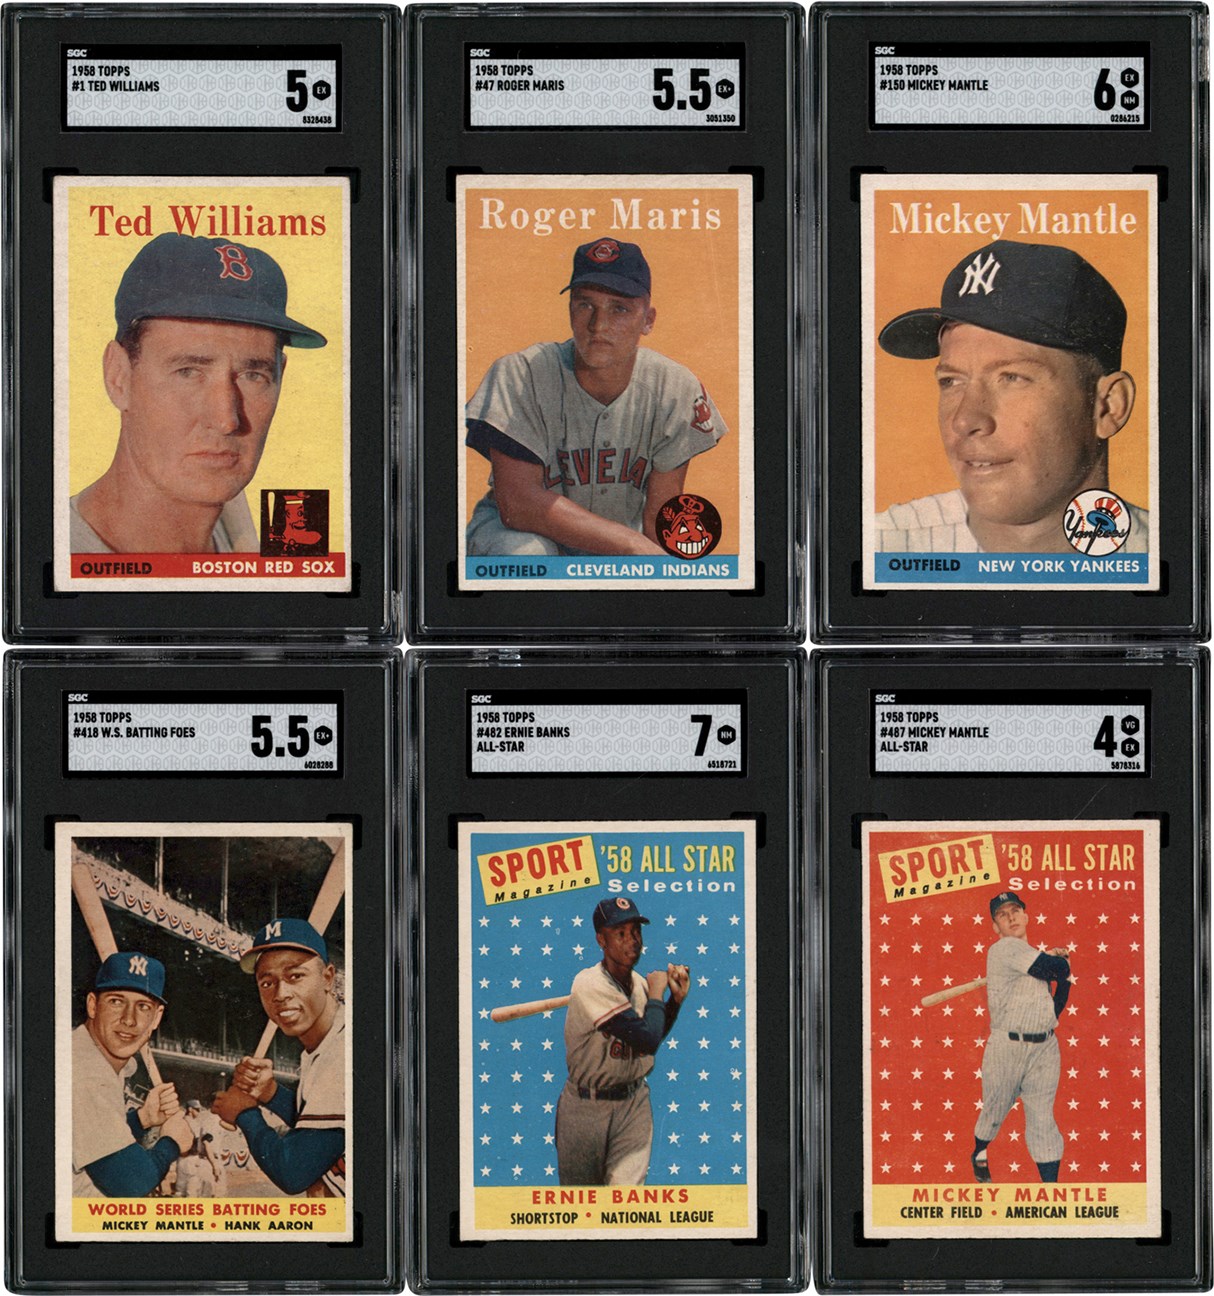 - 1958 Topps Complete Set w/Mickey Mantle SGC 6 (494)